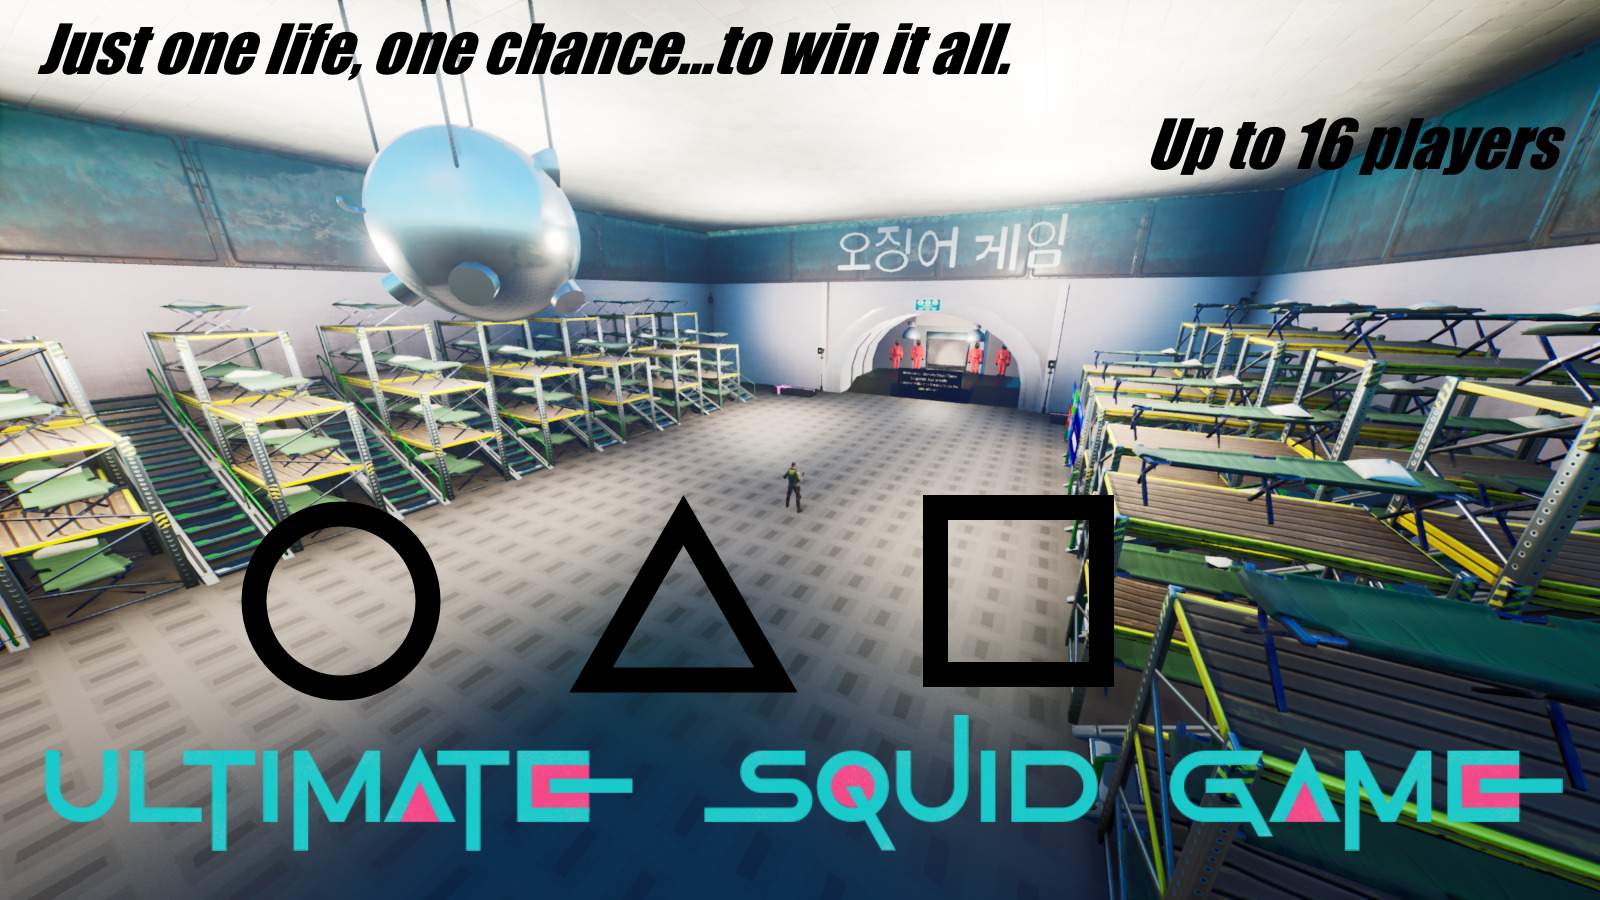 ULTIMATE SQUID GAME - 6 GAMES, 1 LIFE